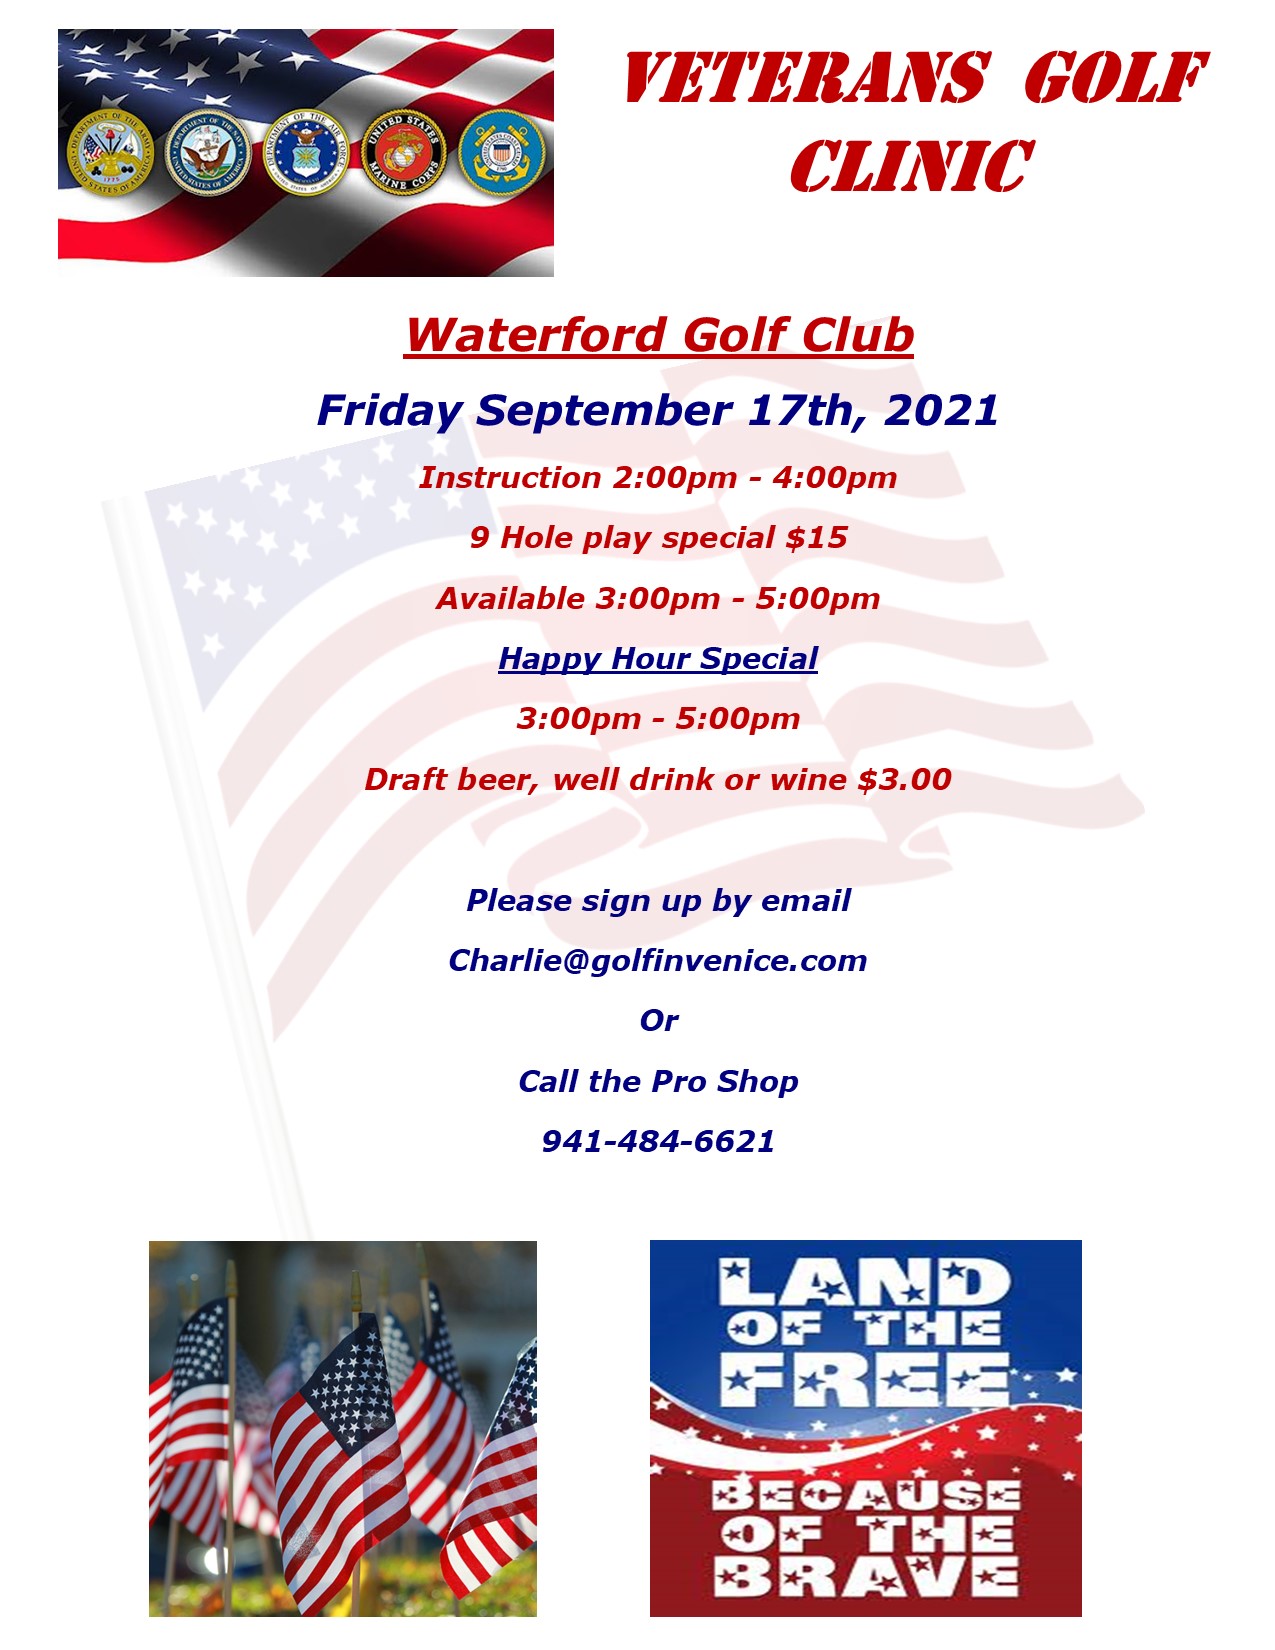 Veterans Golf Clinic Waterford 2021